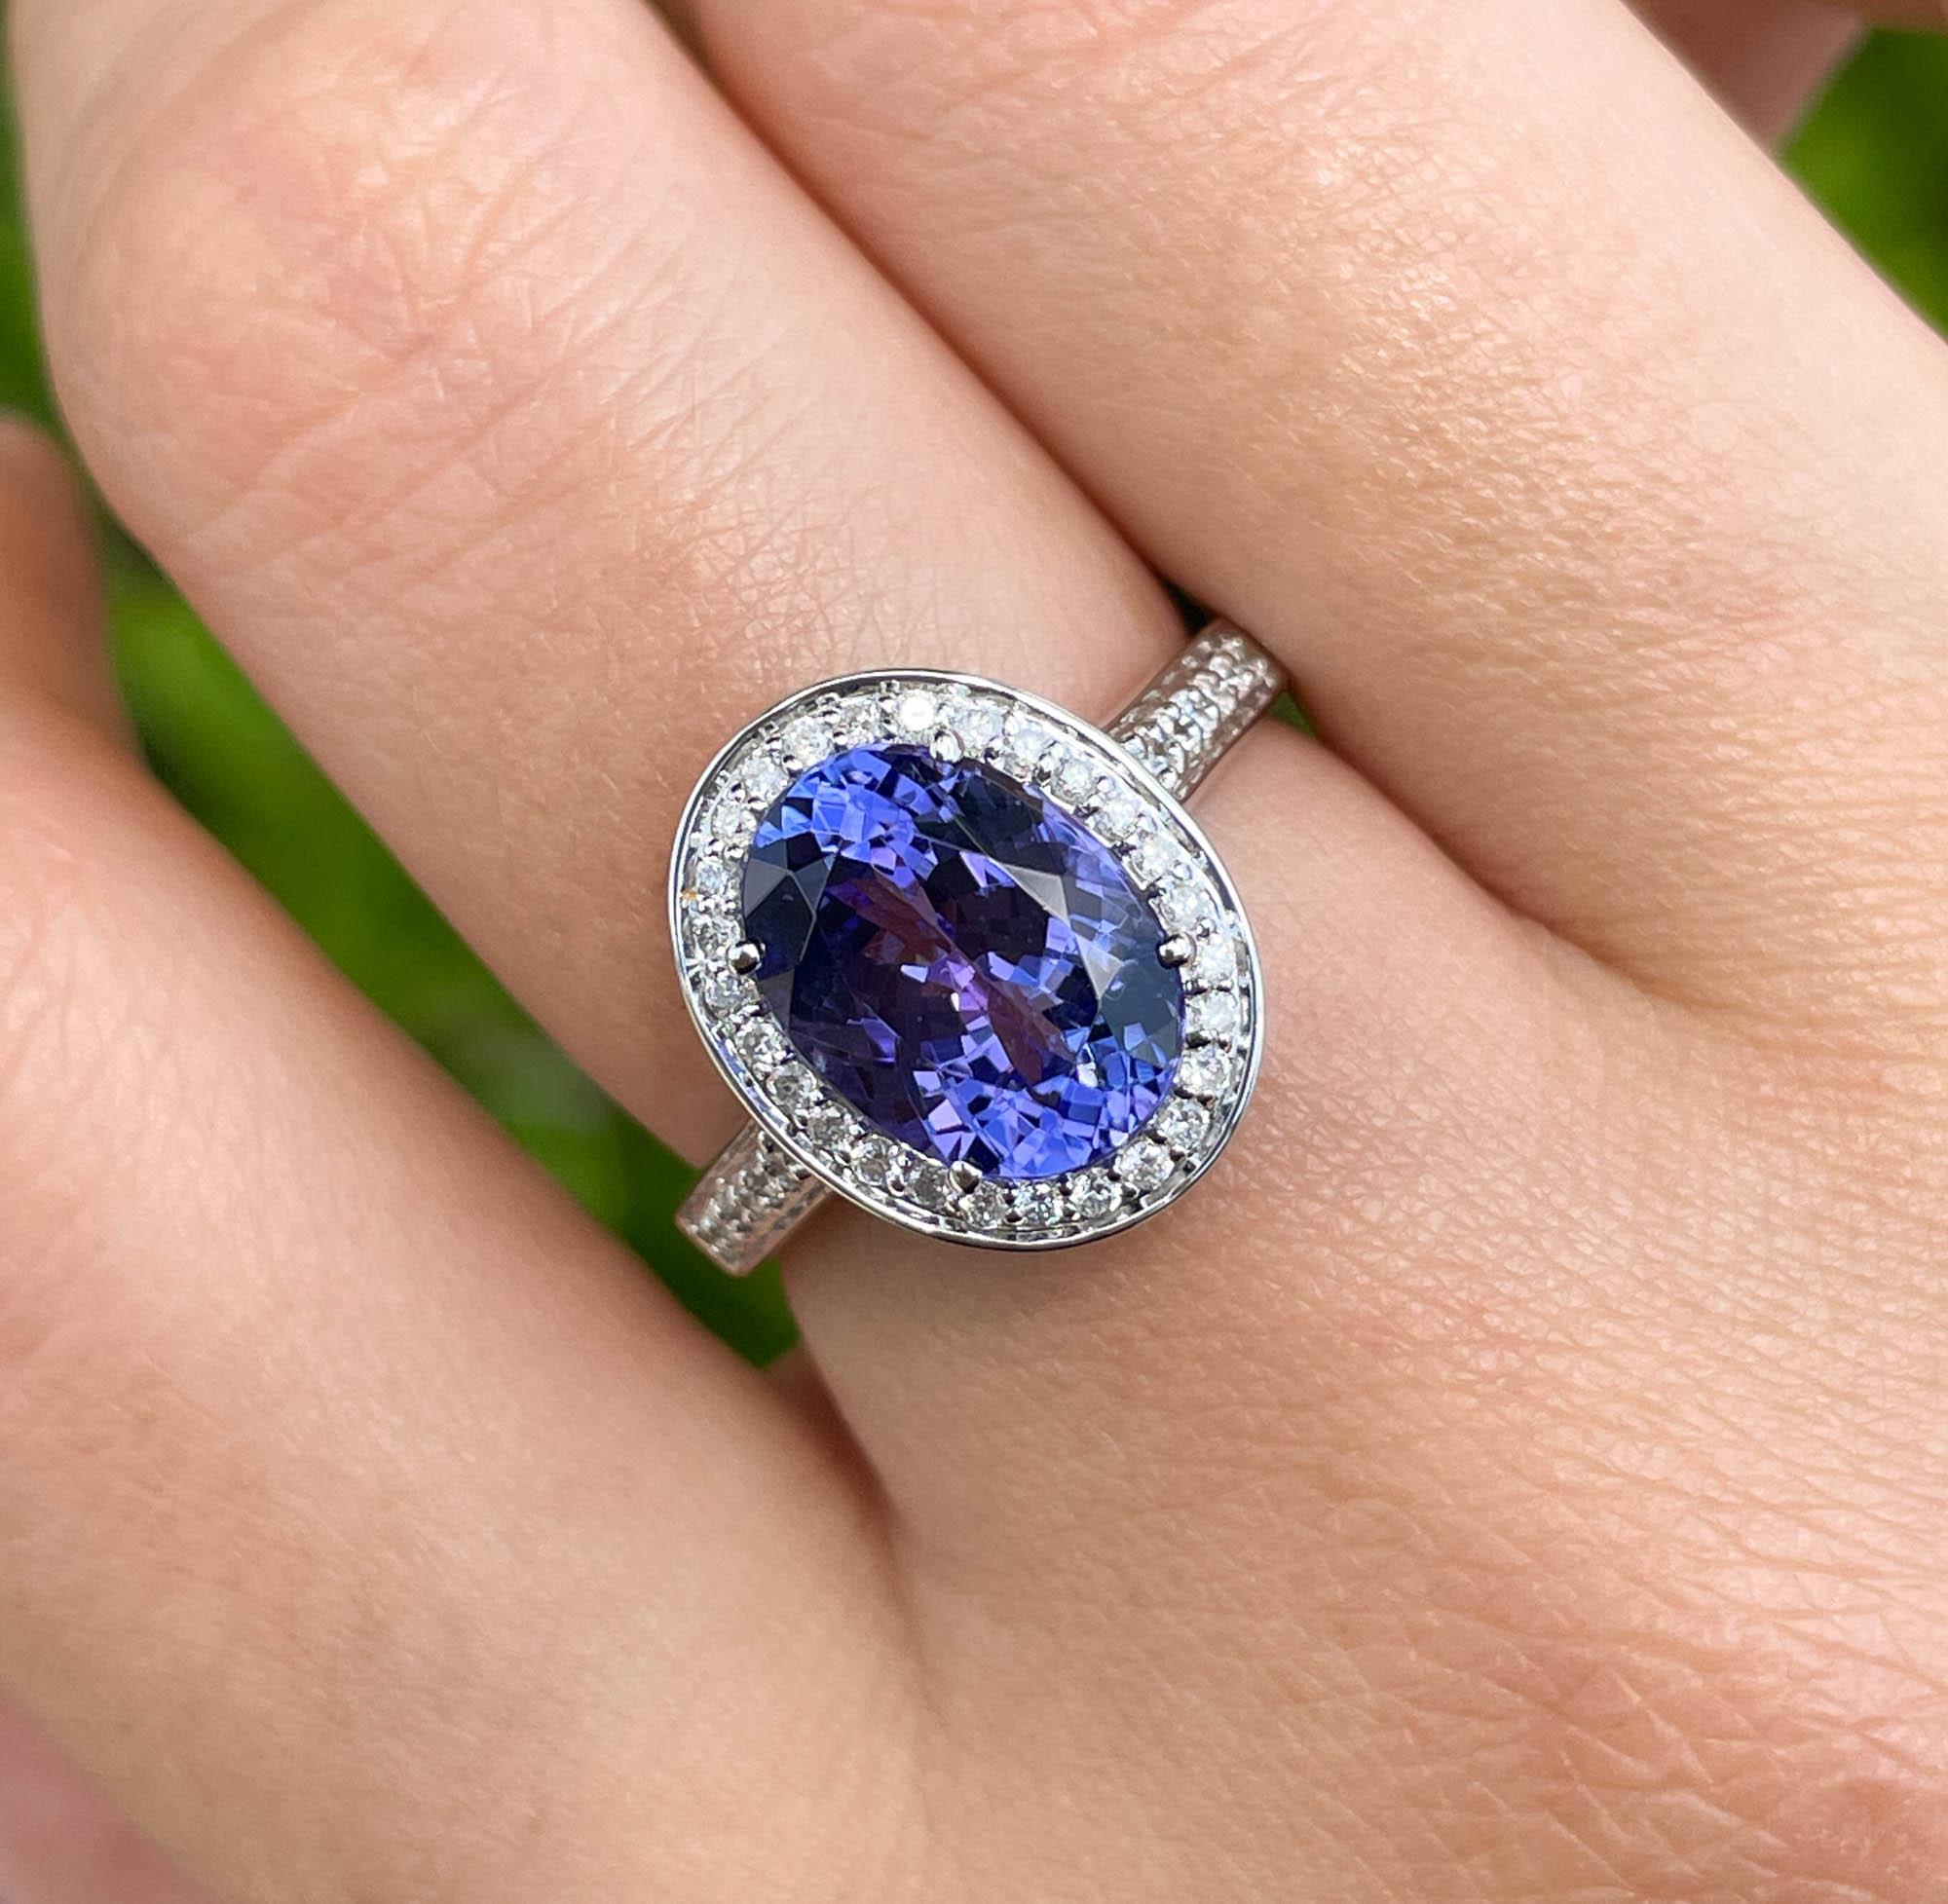 Jay Feder 14k White Gold Tanzanite and Diamond Halo Ring 

The center stone is 3.54ct Oval shaped Tanzanite. Set with 39 round diamonds in halo and on the band, total carat weight is 0.27ct.

The top's outline measurements are 14.30x11.68mm. The